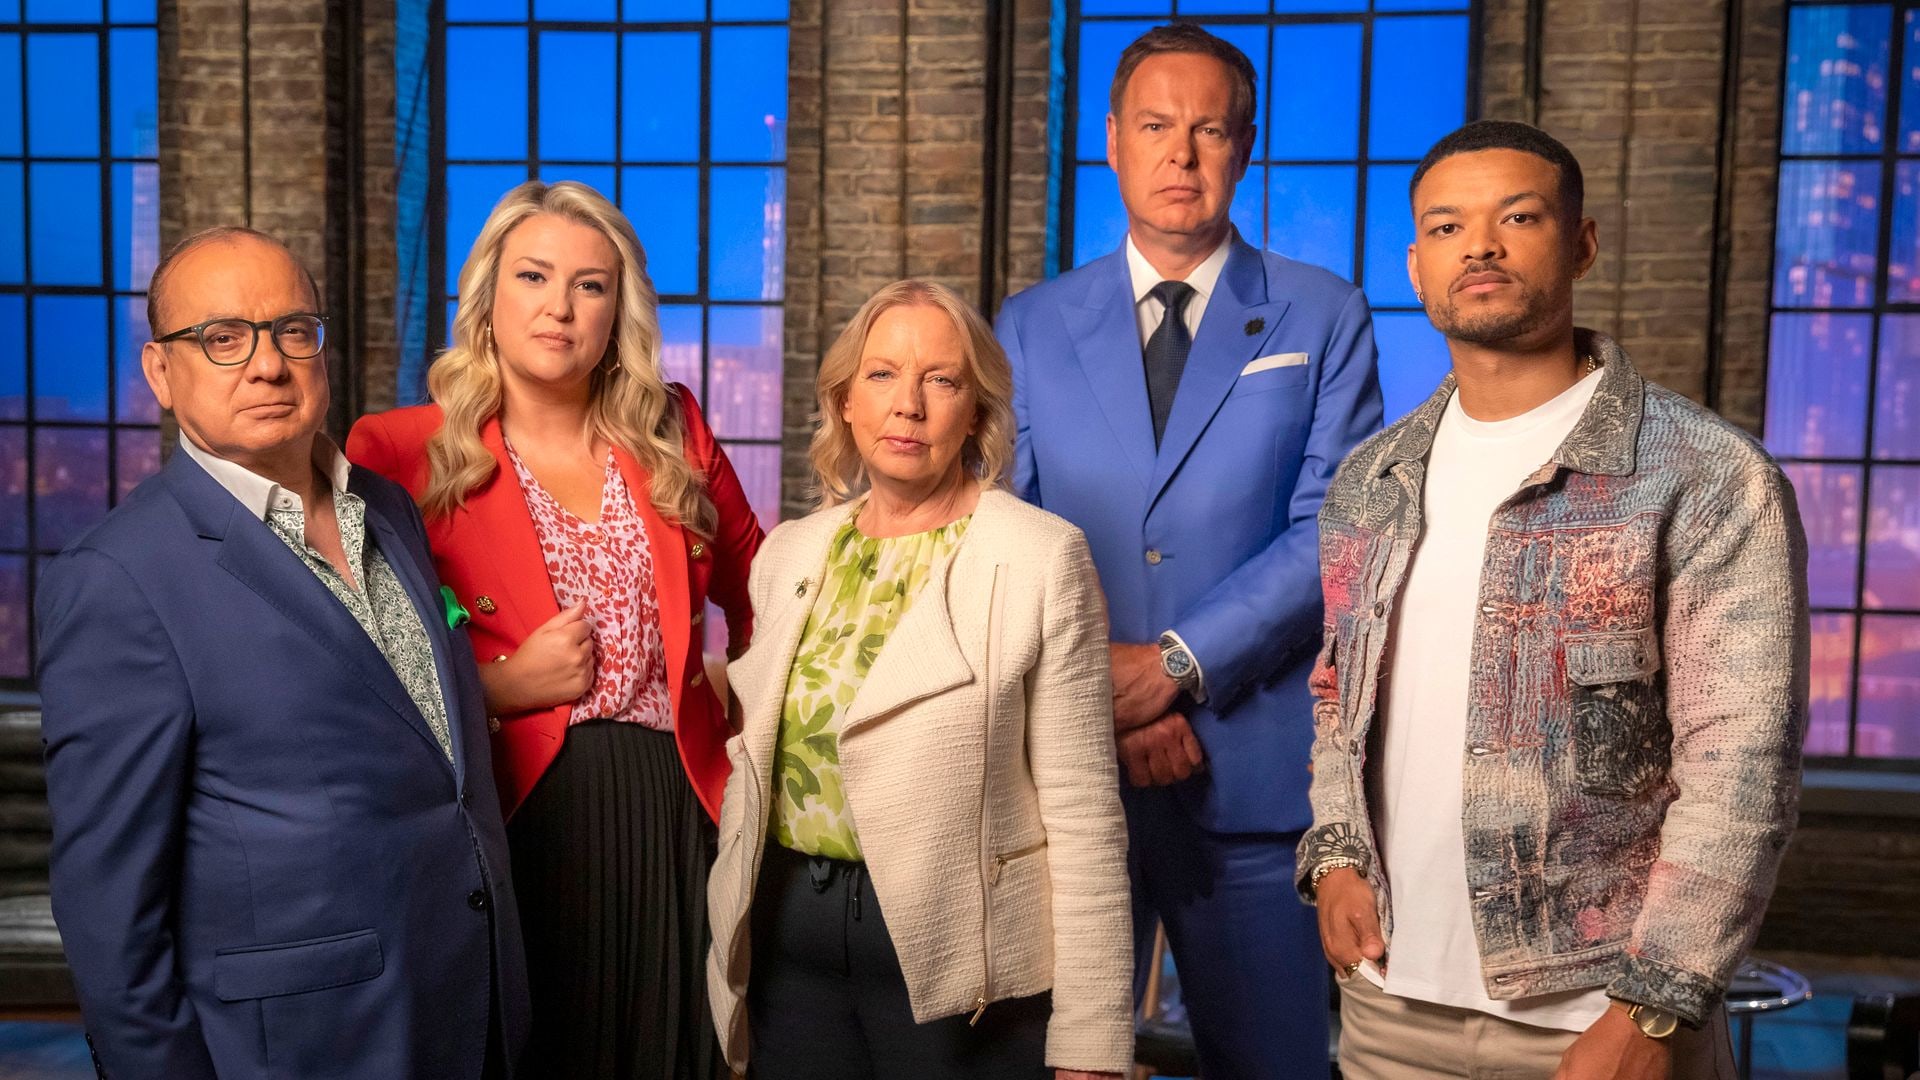 Dragons' Den: 6 most successful businesses from the show